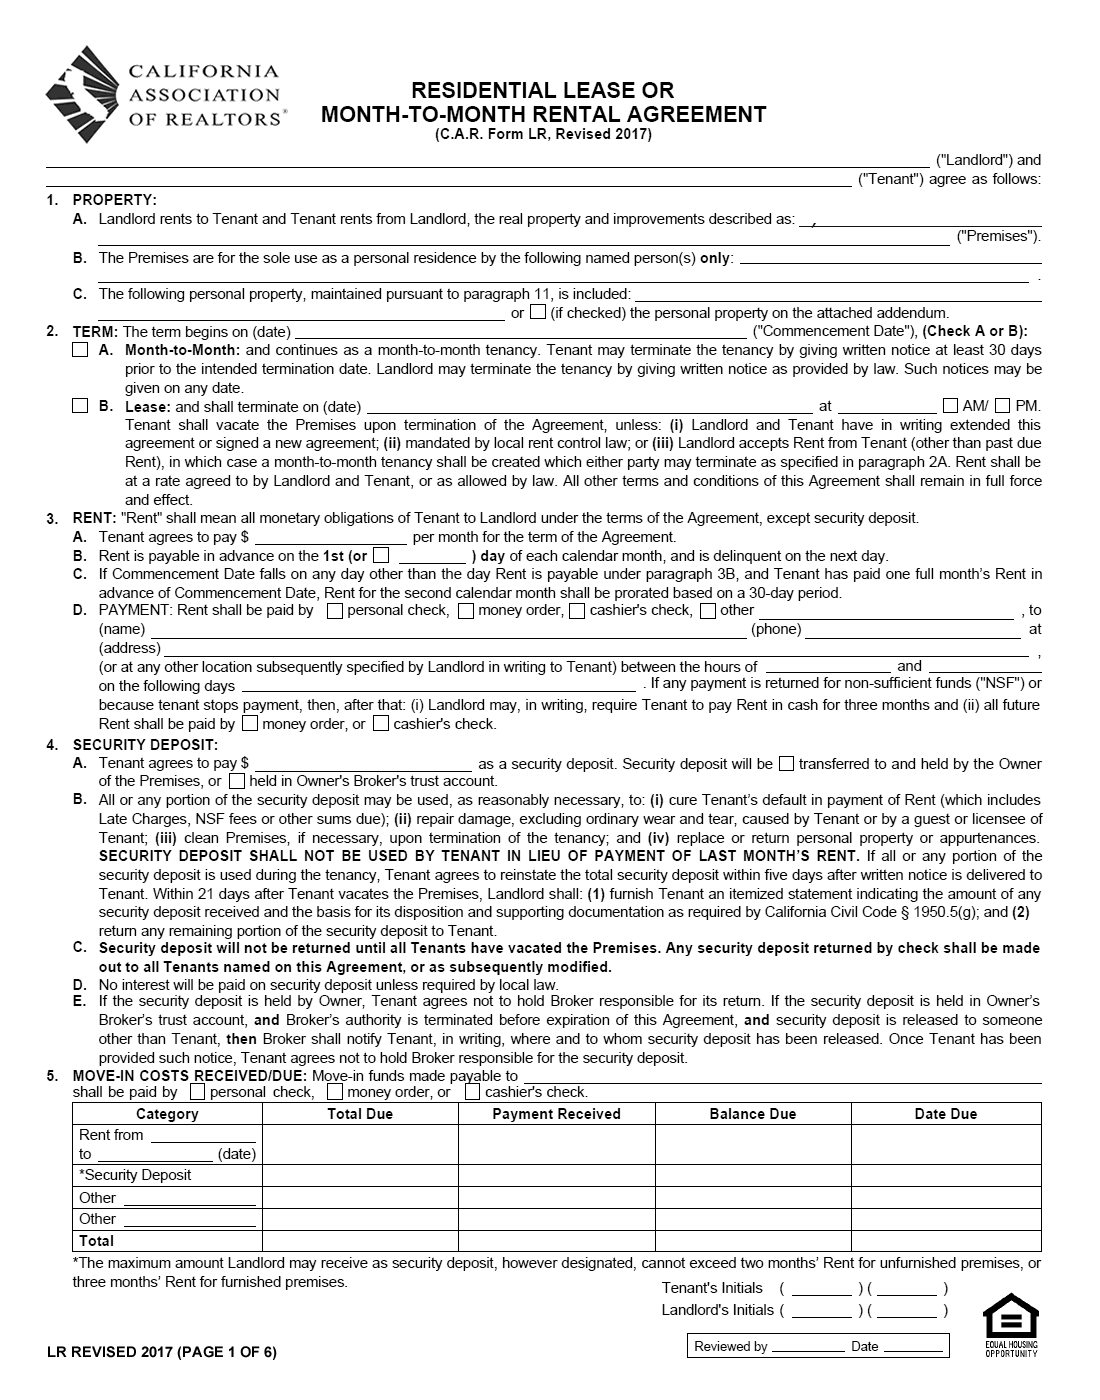 car-residential-lease-agreement-printable-form-templates-and-letter